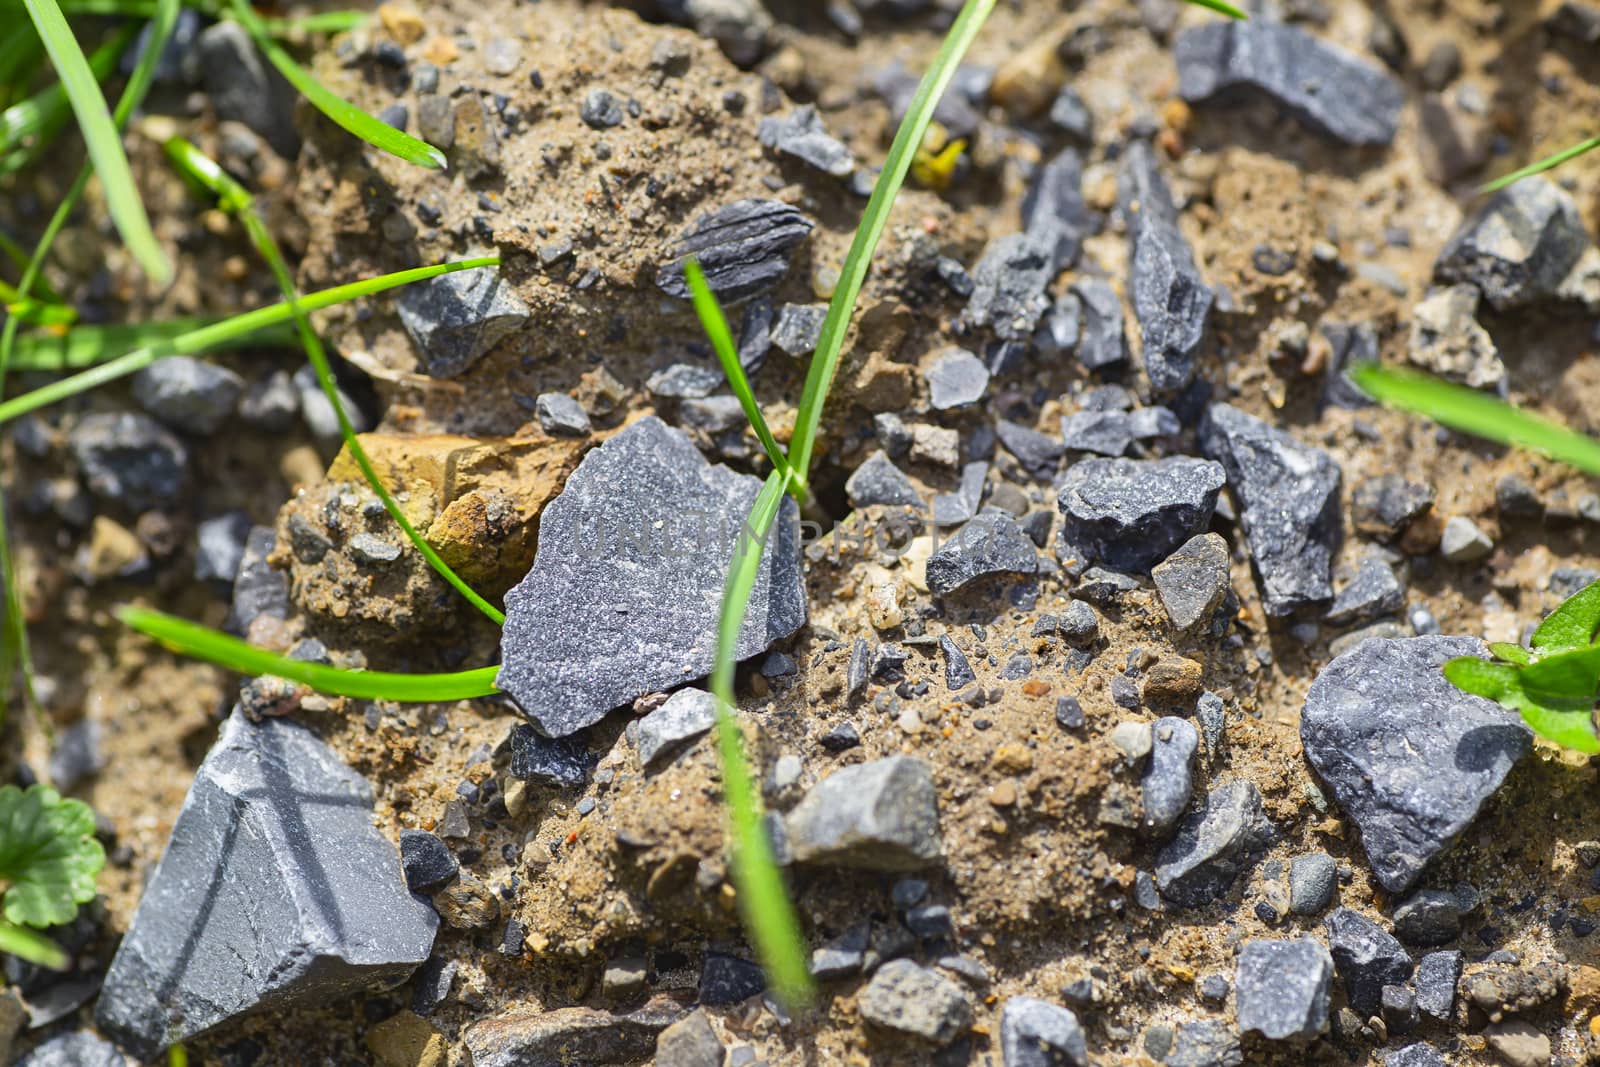 Macro view of blue gravel rock in the earth with grass growing around it